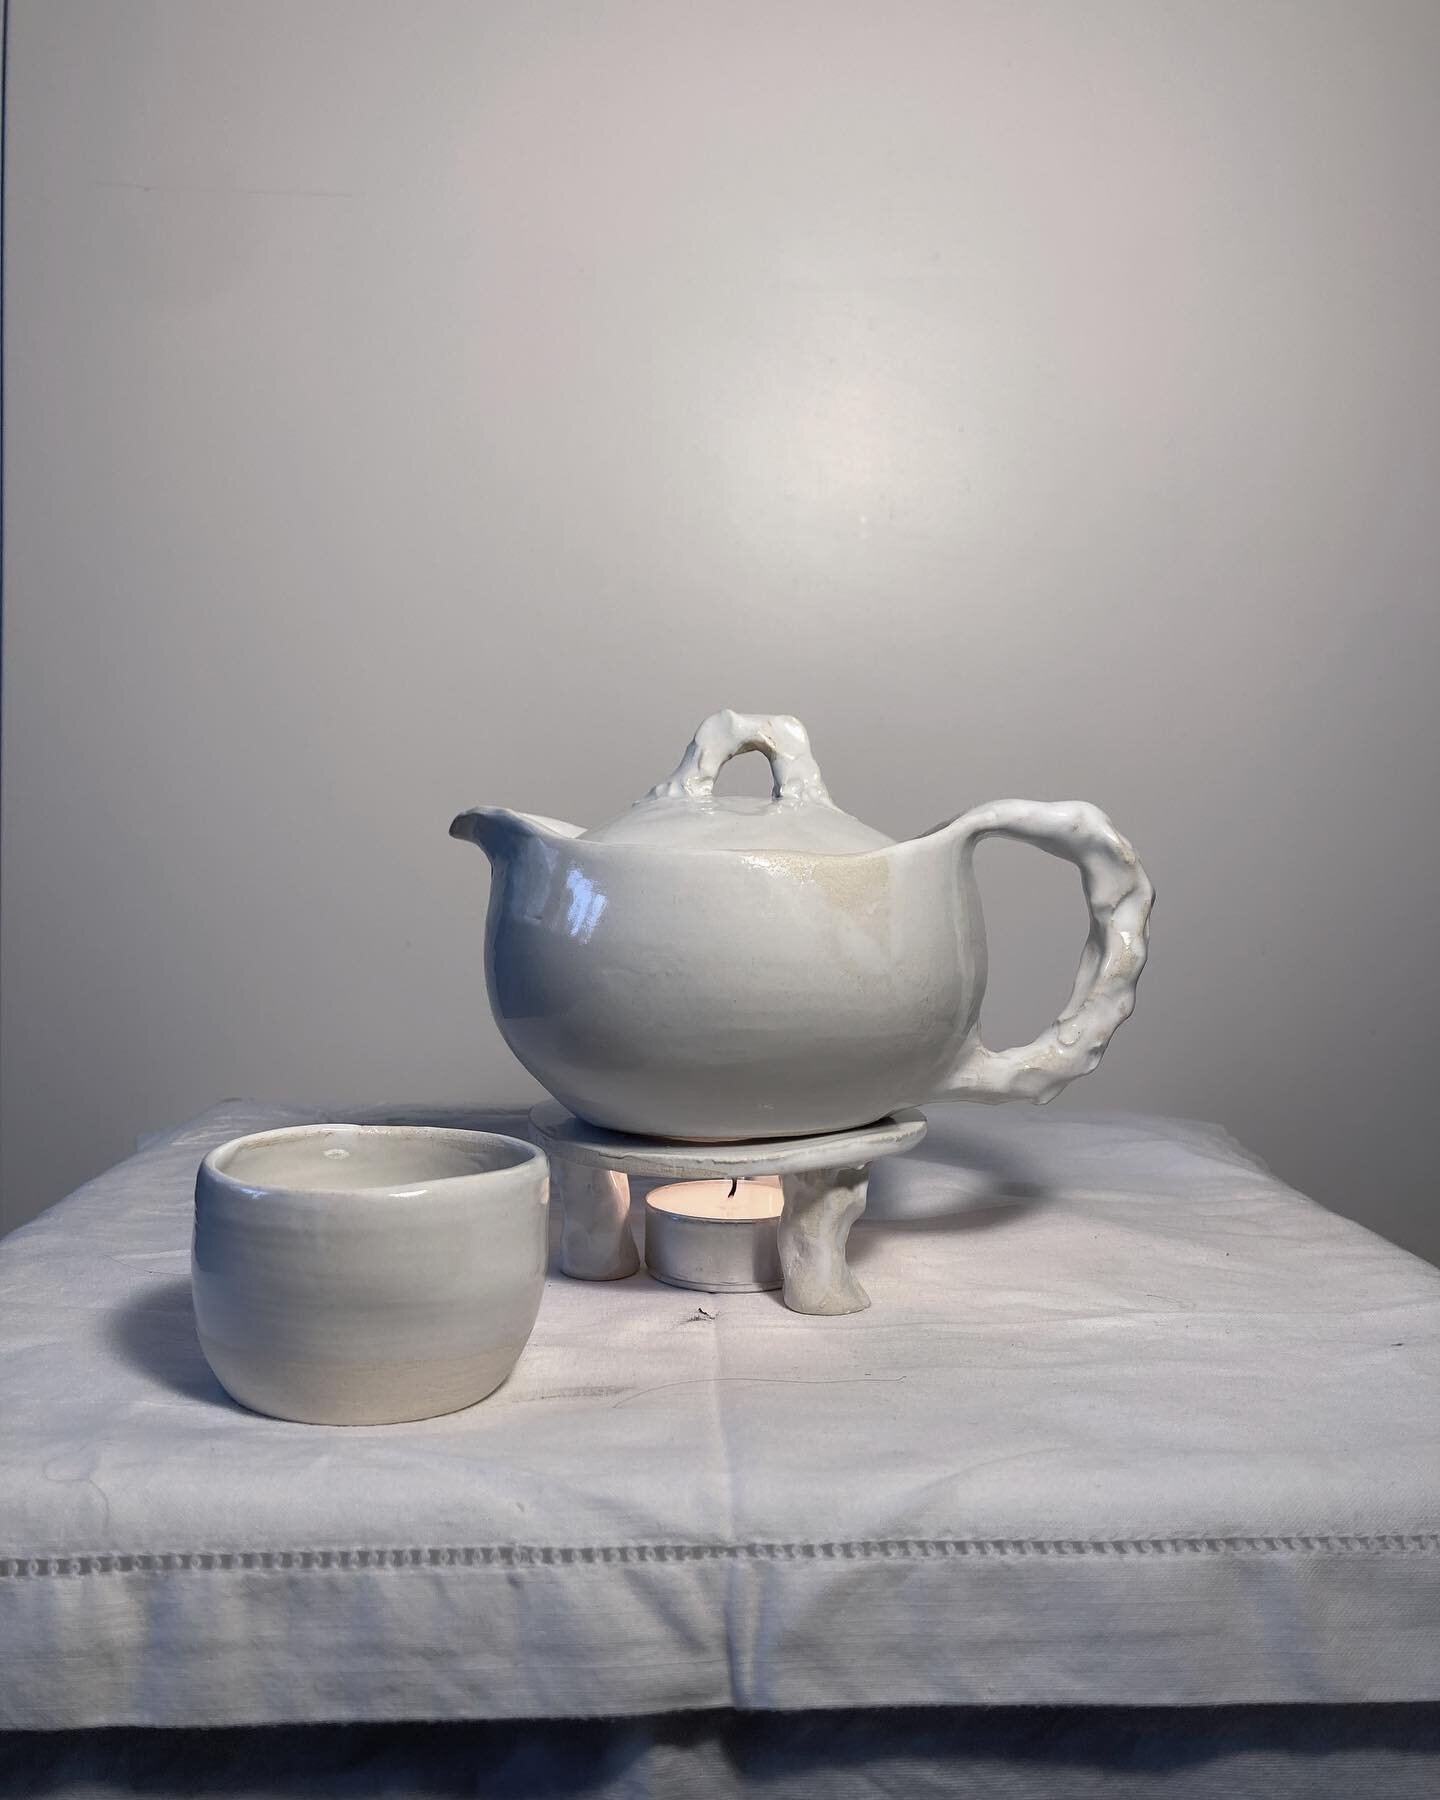 Tea anyone? Infusi&oacute;n?
Cute tea set made of clay and glazed in white. Les Anses moches.
.
.
.
#ceramique #ceramics #ceramicart #teaset #clay #reconsider